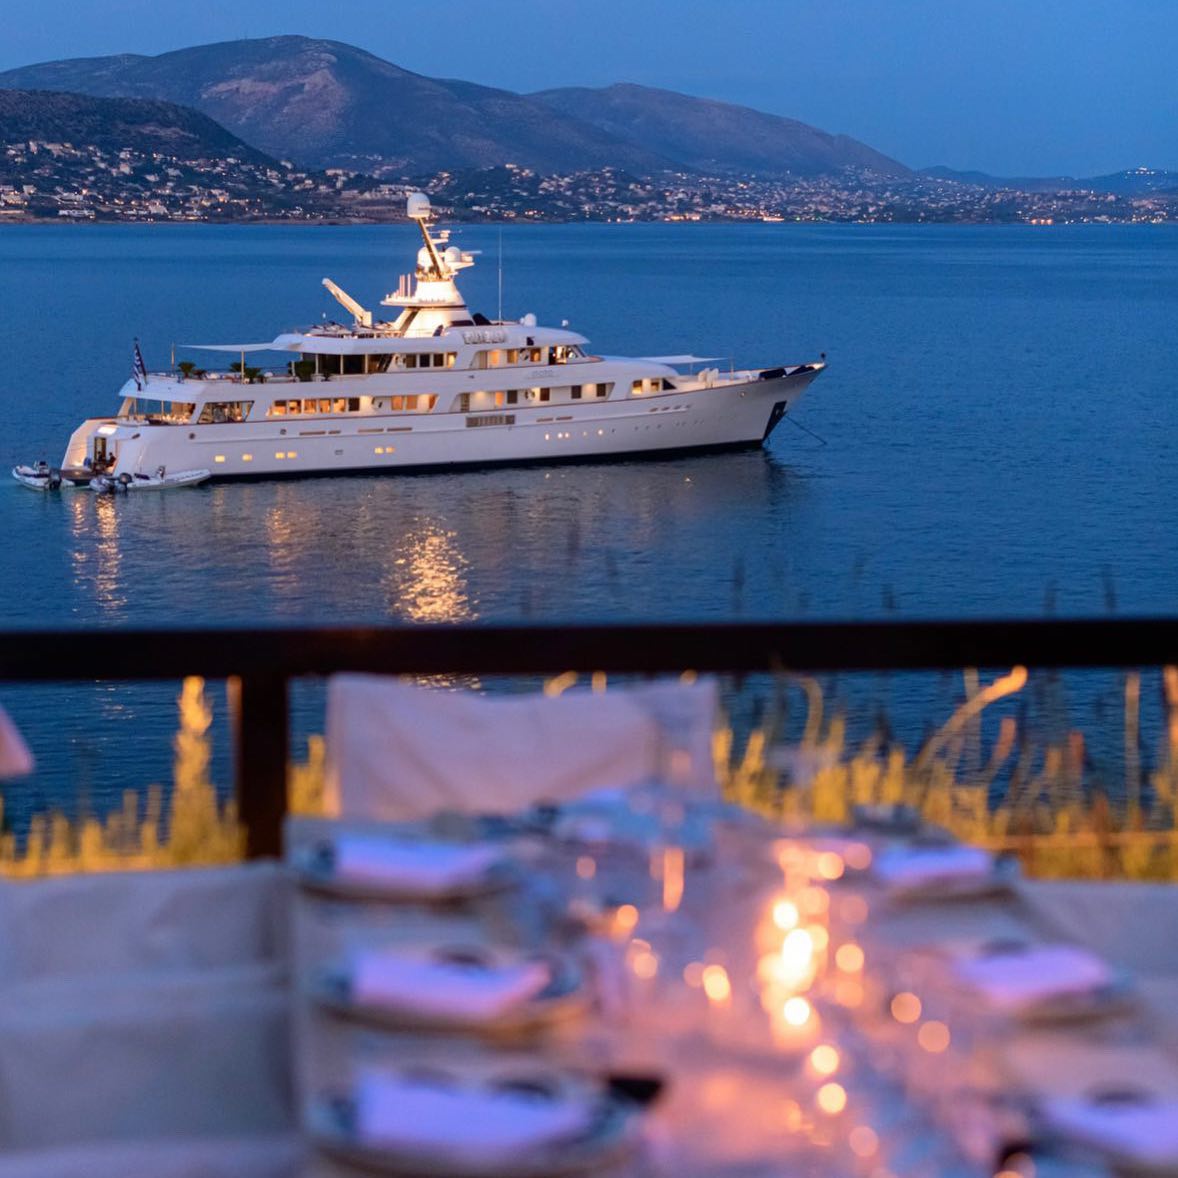 On top of the rock, in continuation of the club and overlooking the sea, the Island restaurant spreads dynamically